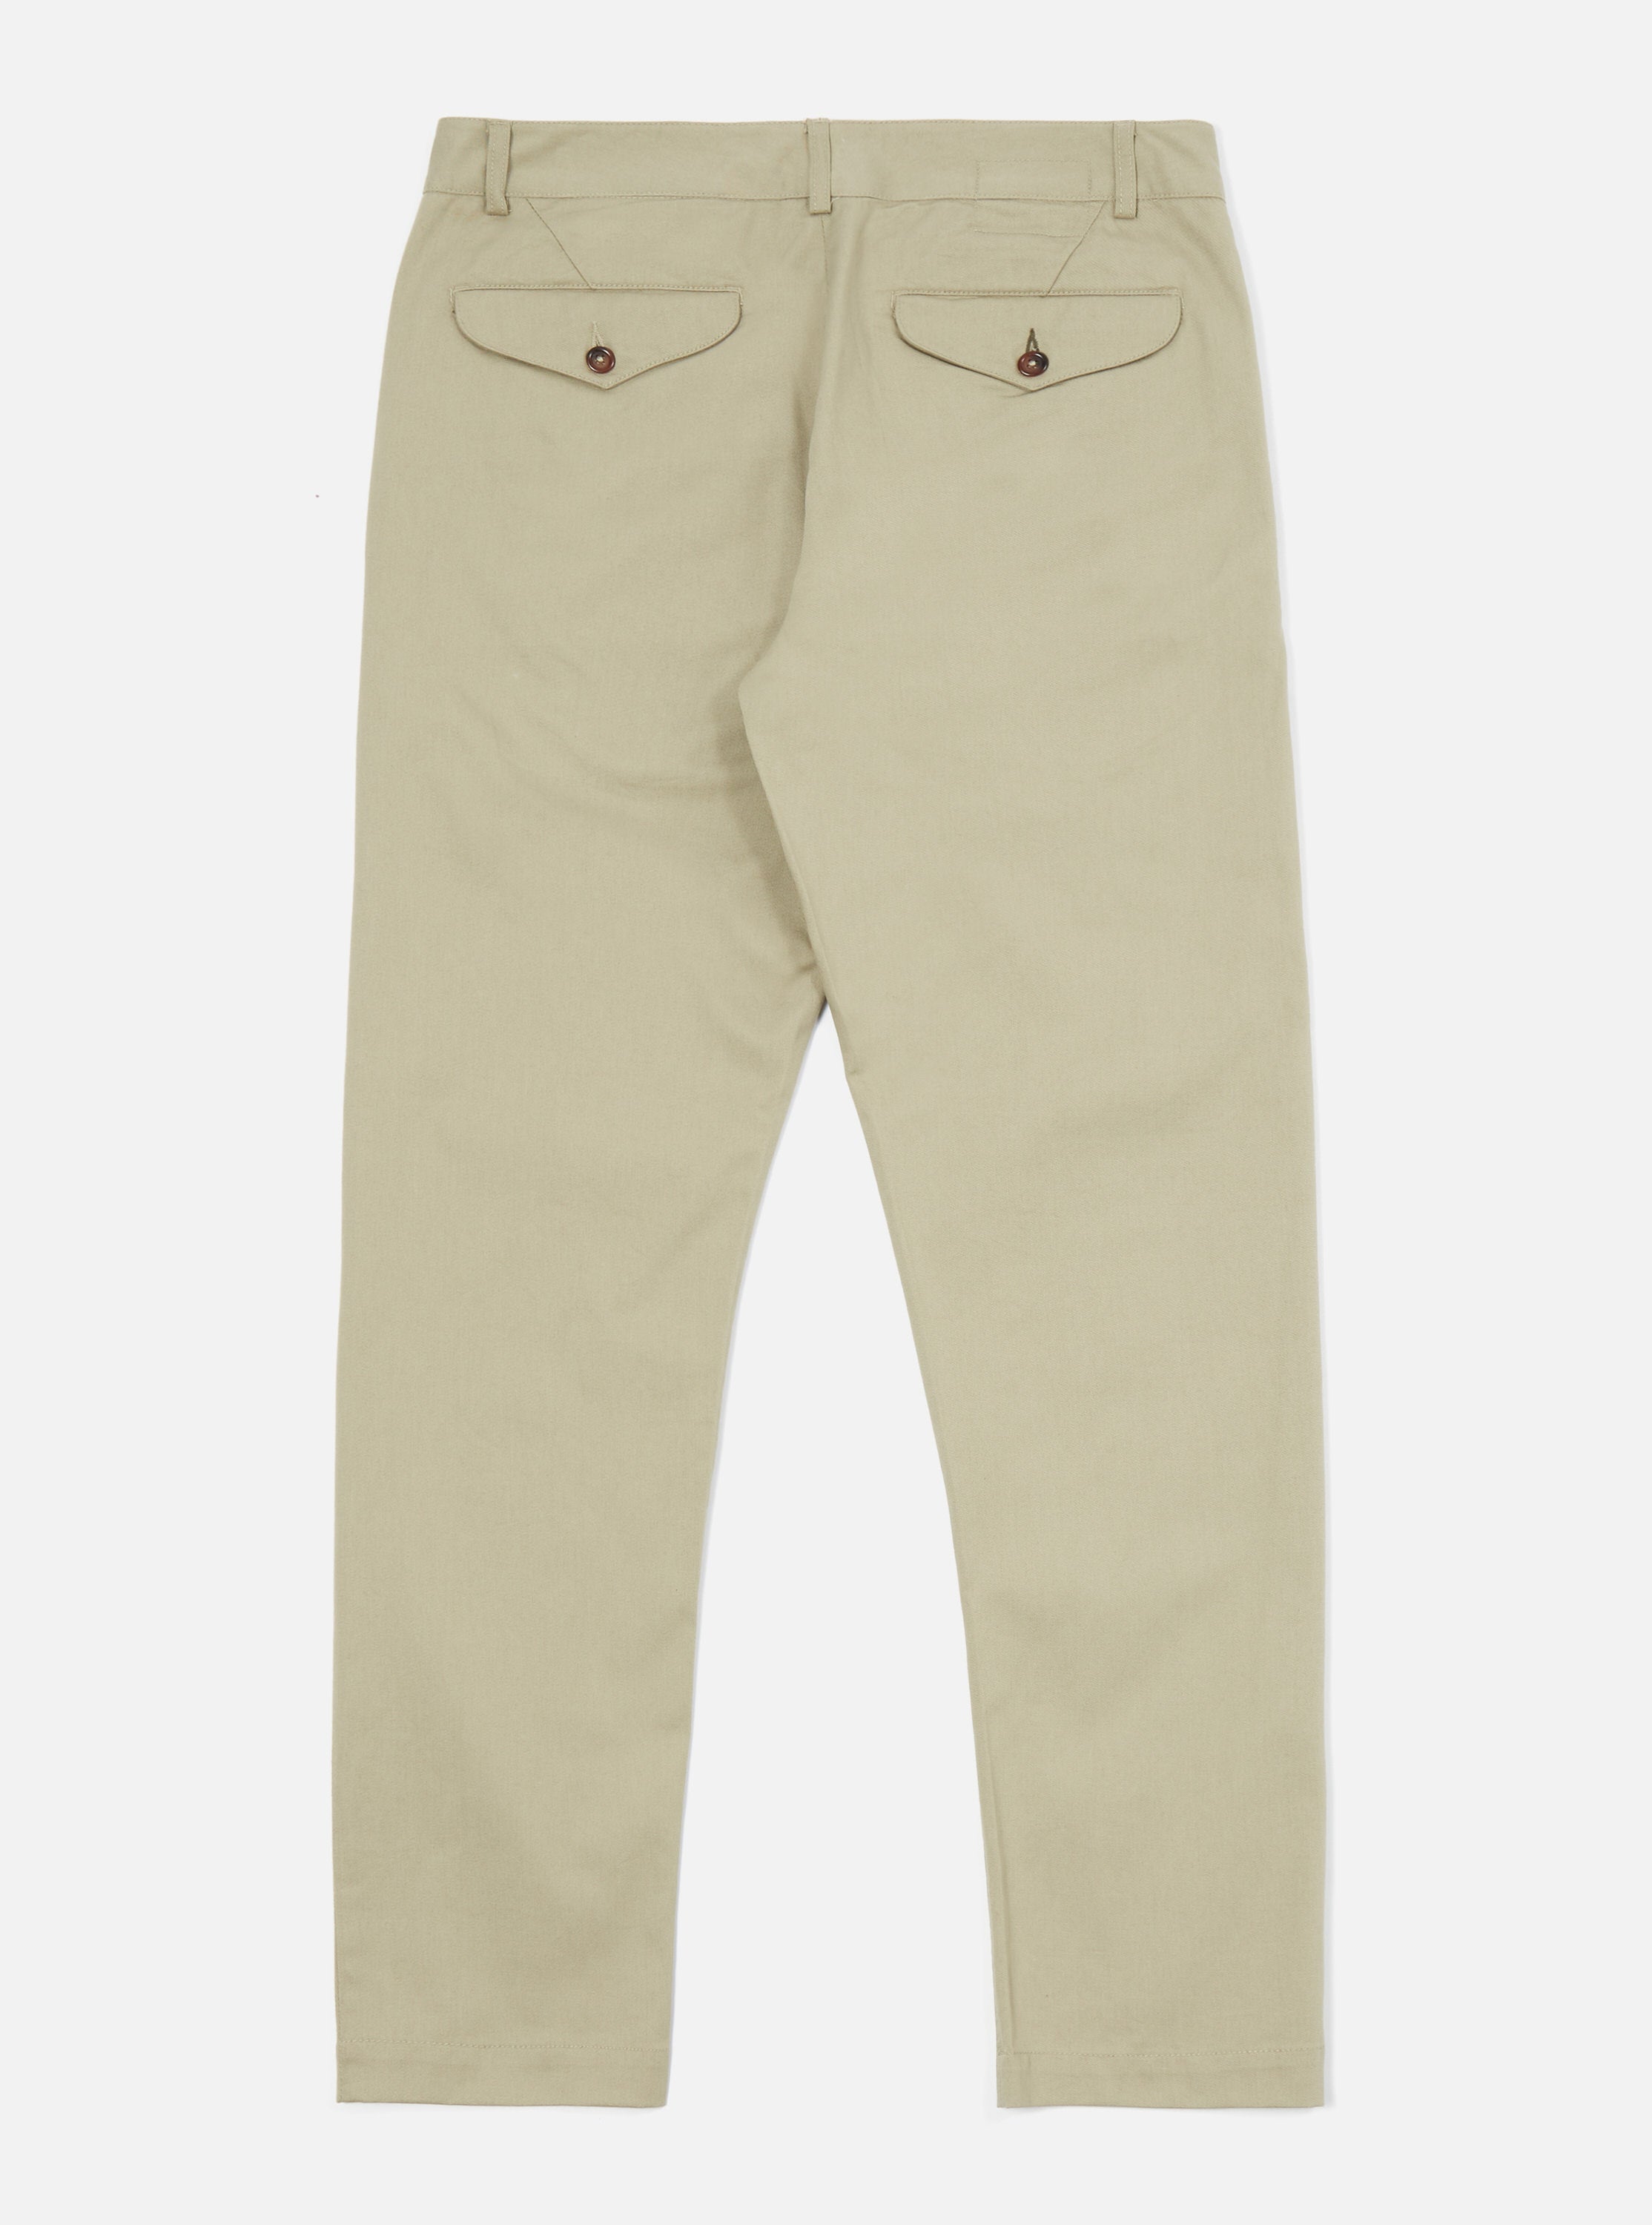 Universal Works Aston Pant in Stone Twill